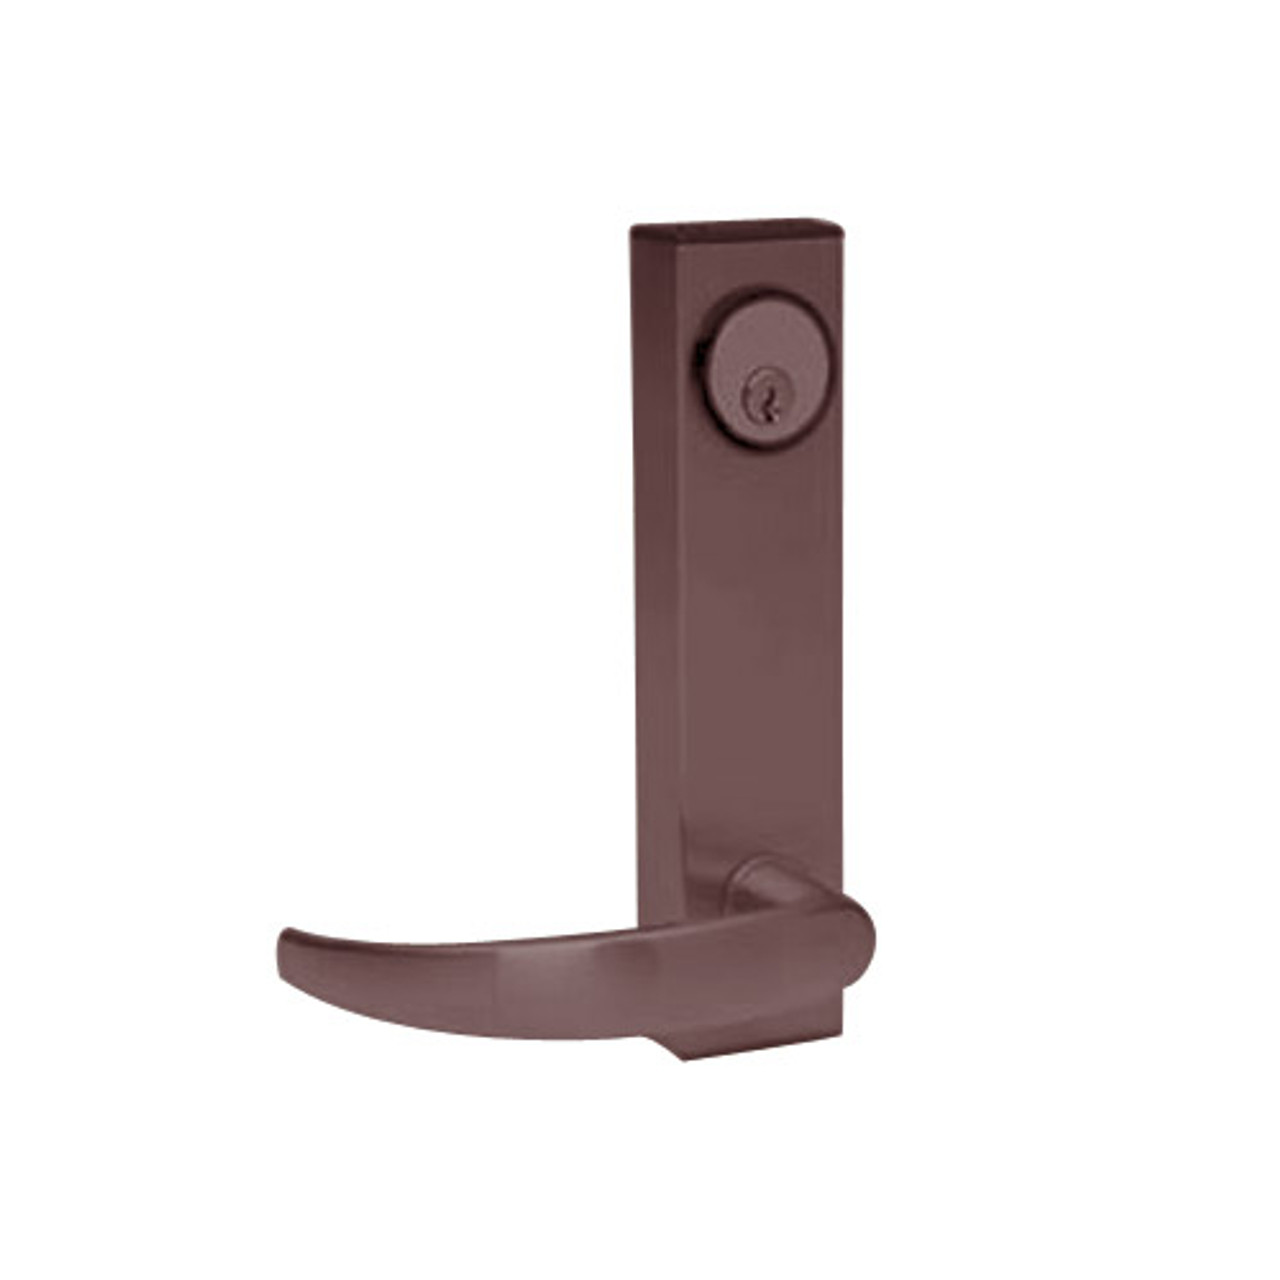 3080E-01-0-9U-55 US10B Adams Rite Electrified Entry Trim with Curve Lever in Oil Rubbed Bronze Finish